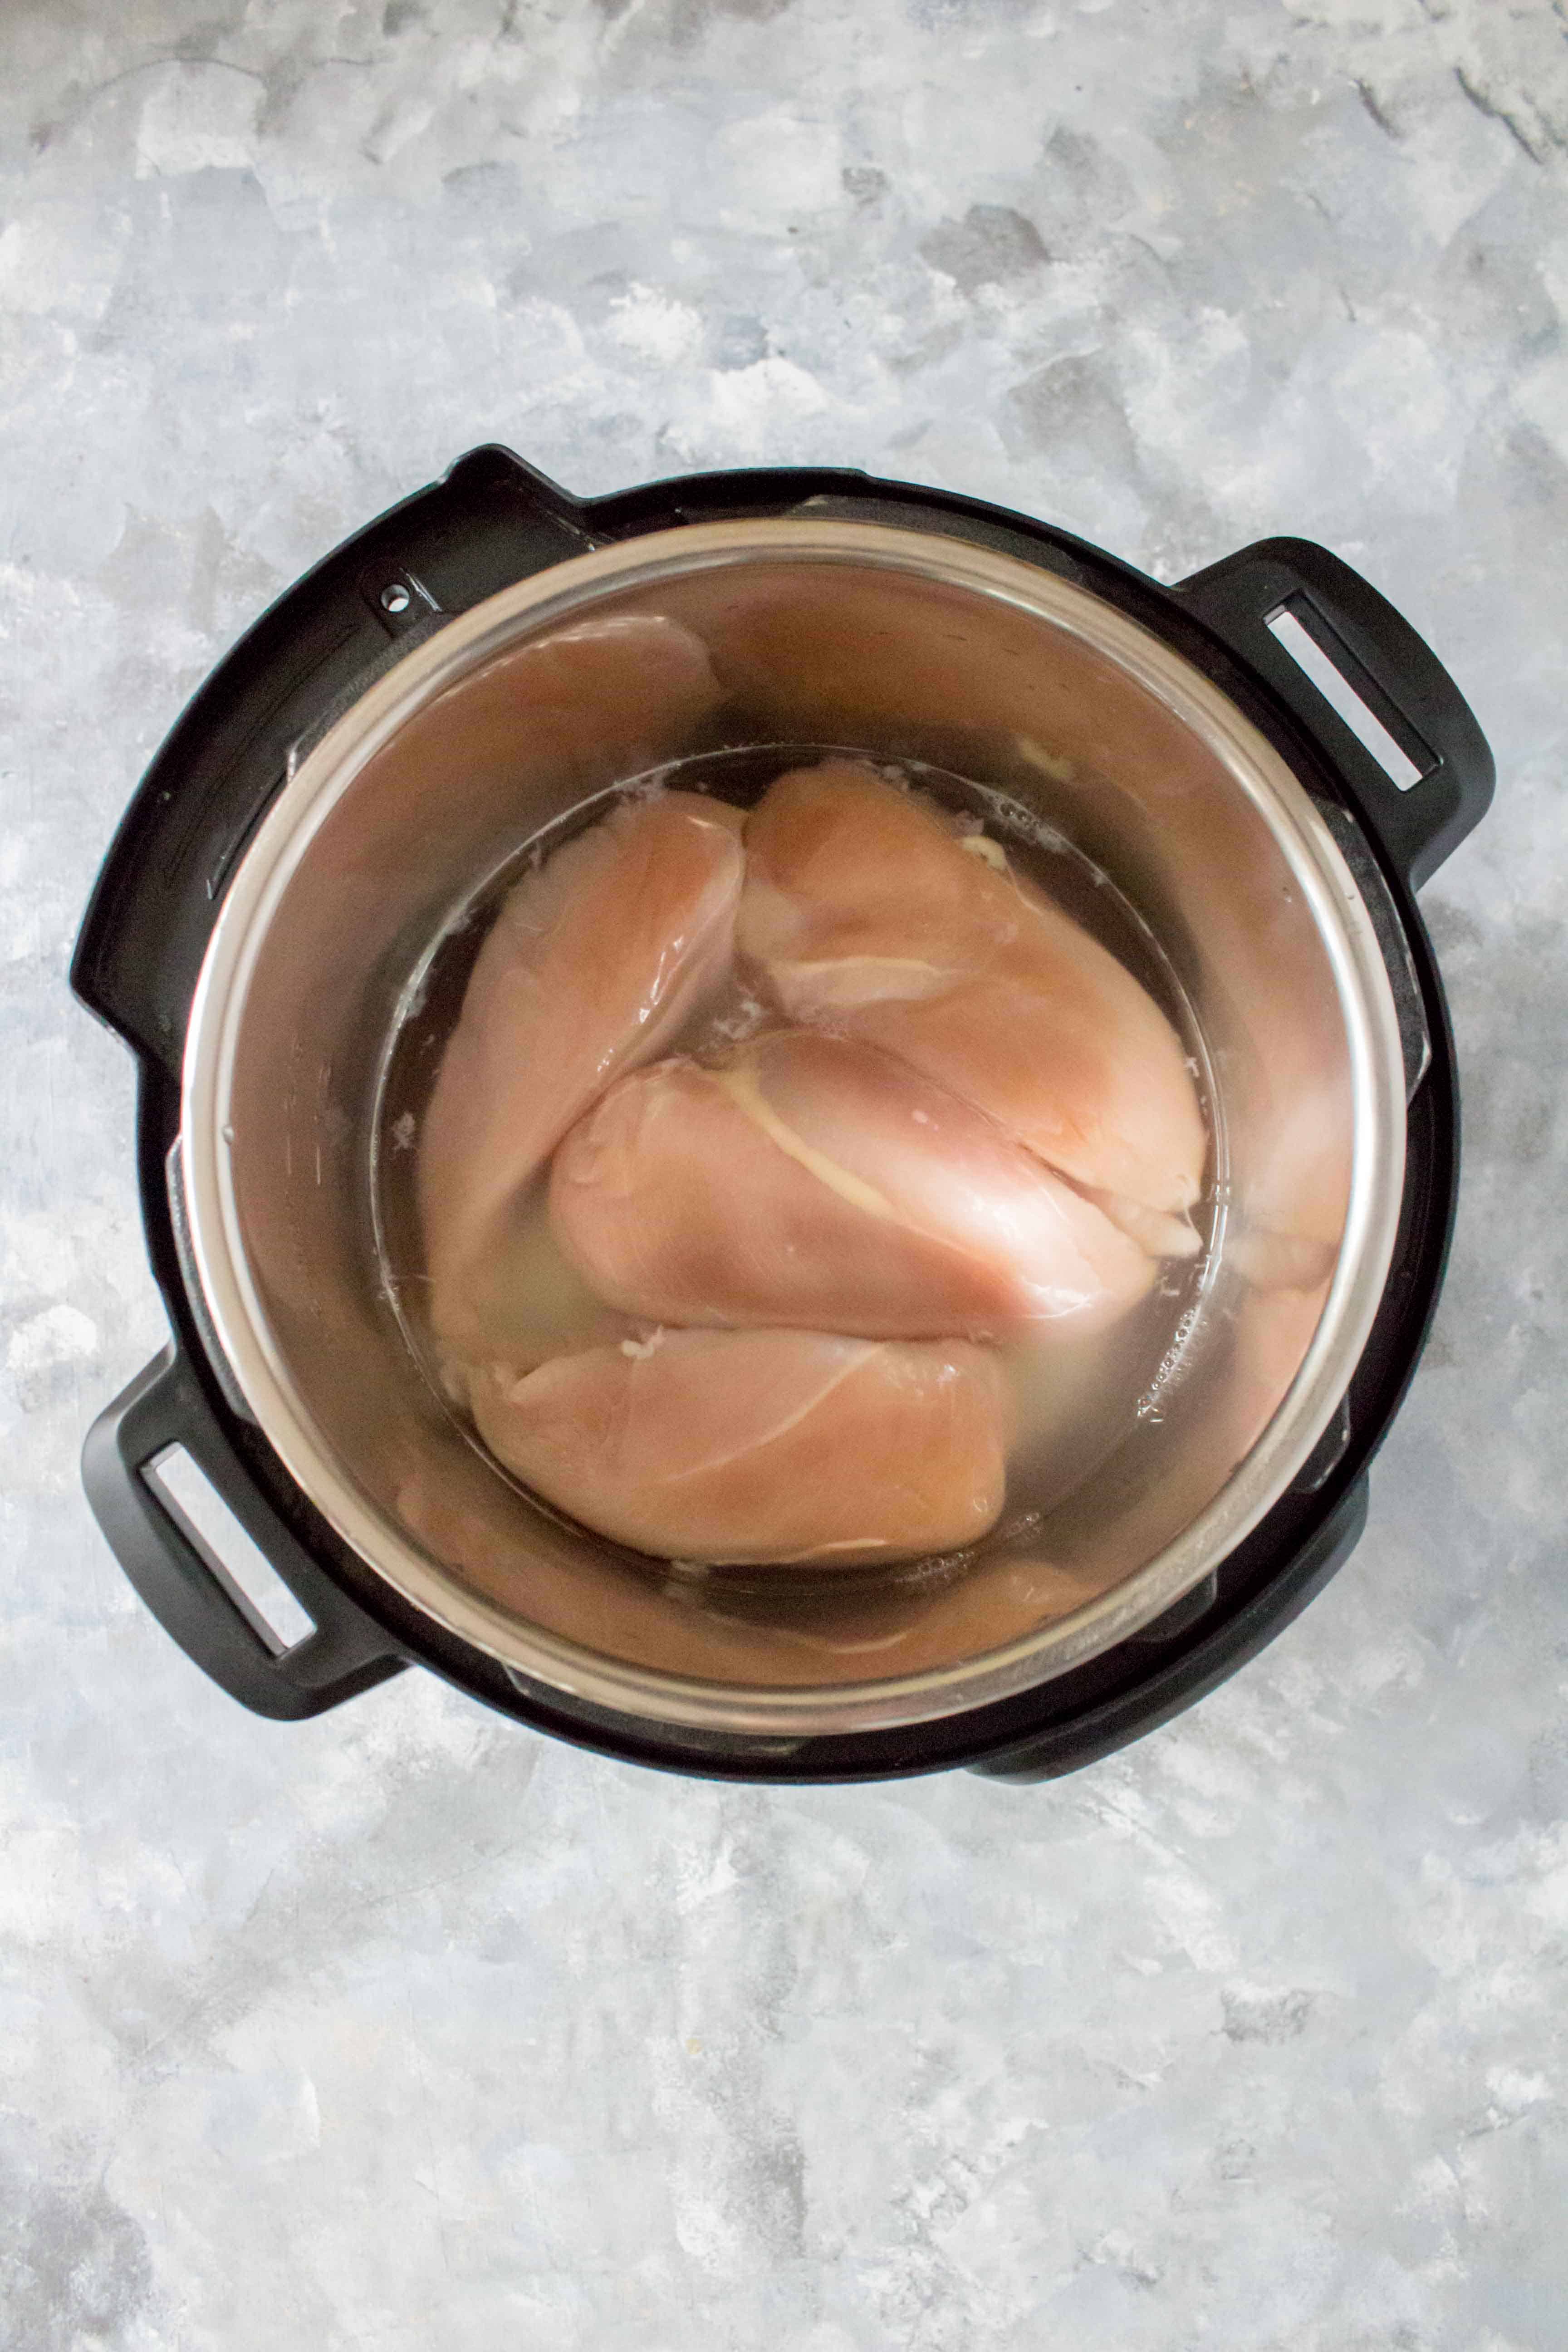 How To Make Shredded Chicken in the Instant Pot